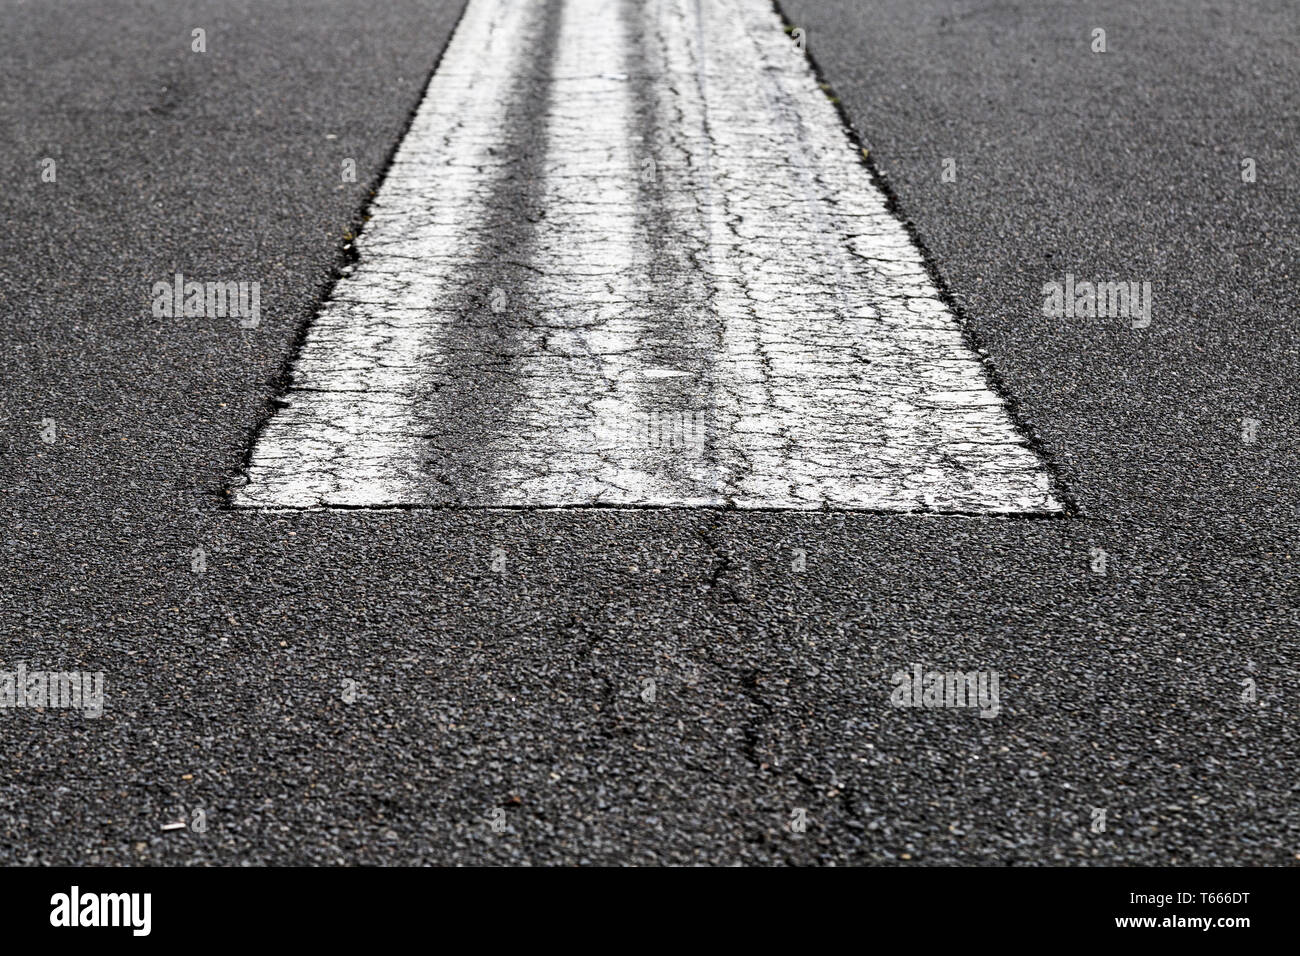 road marking on an airstrip at airport Stock Photo